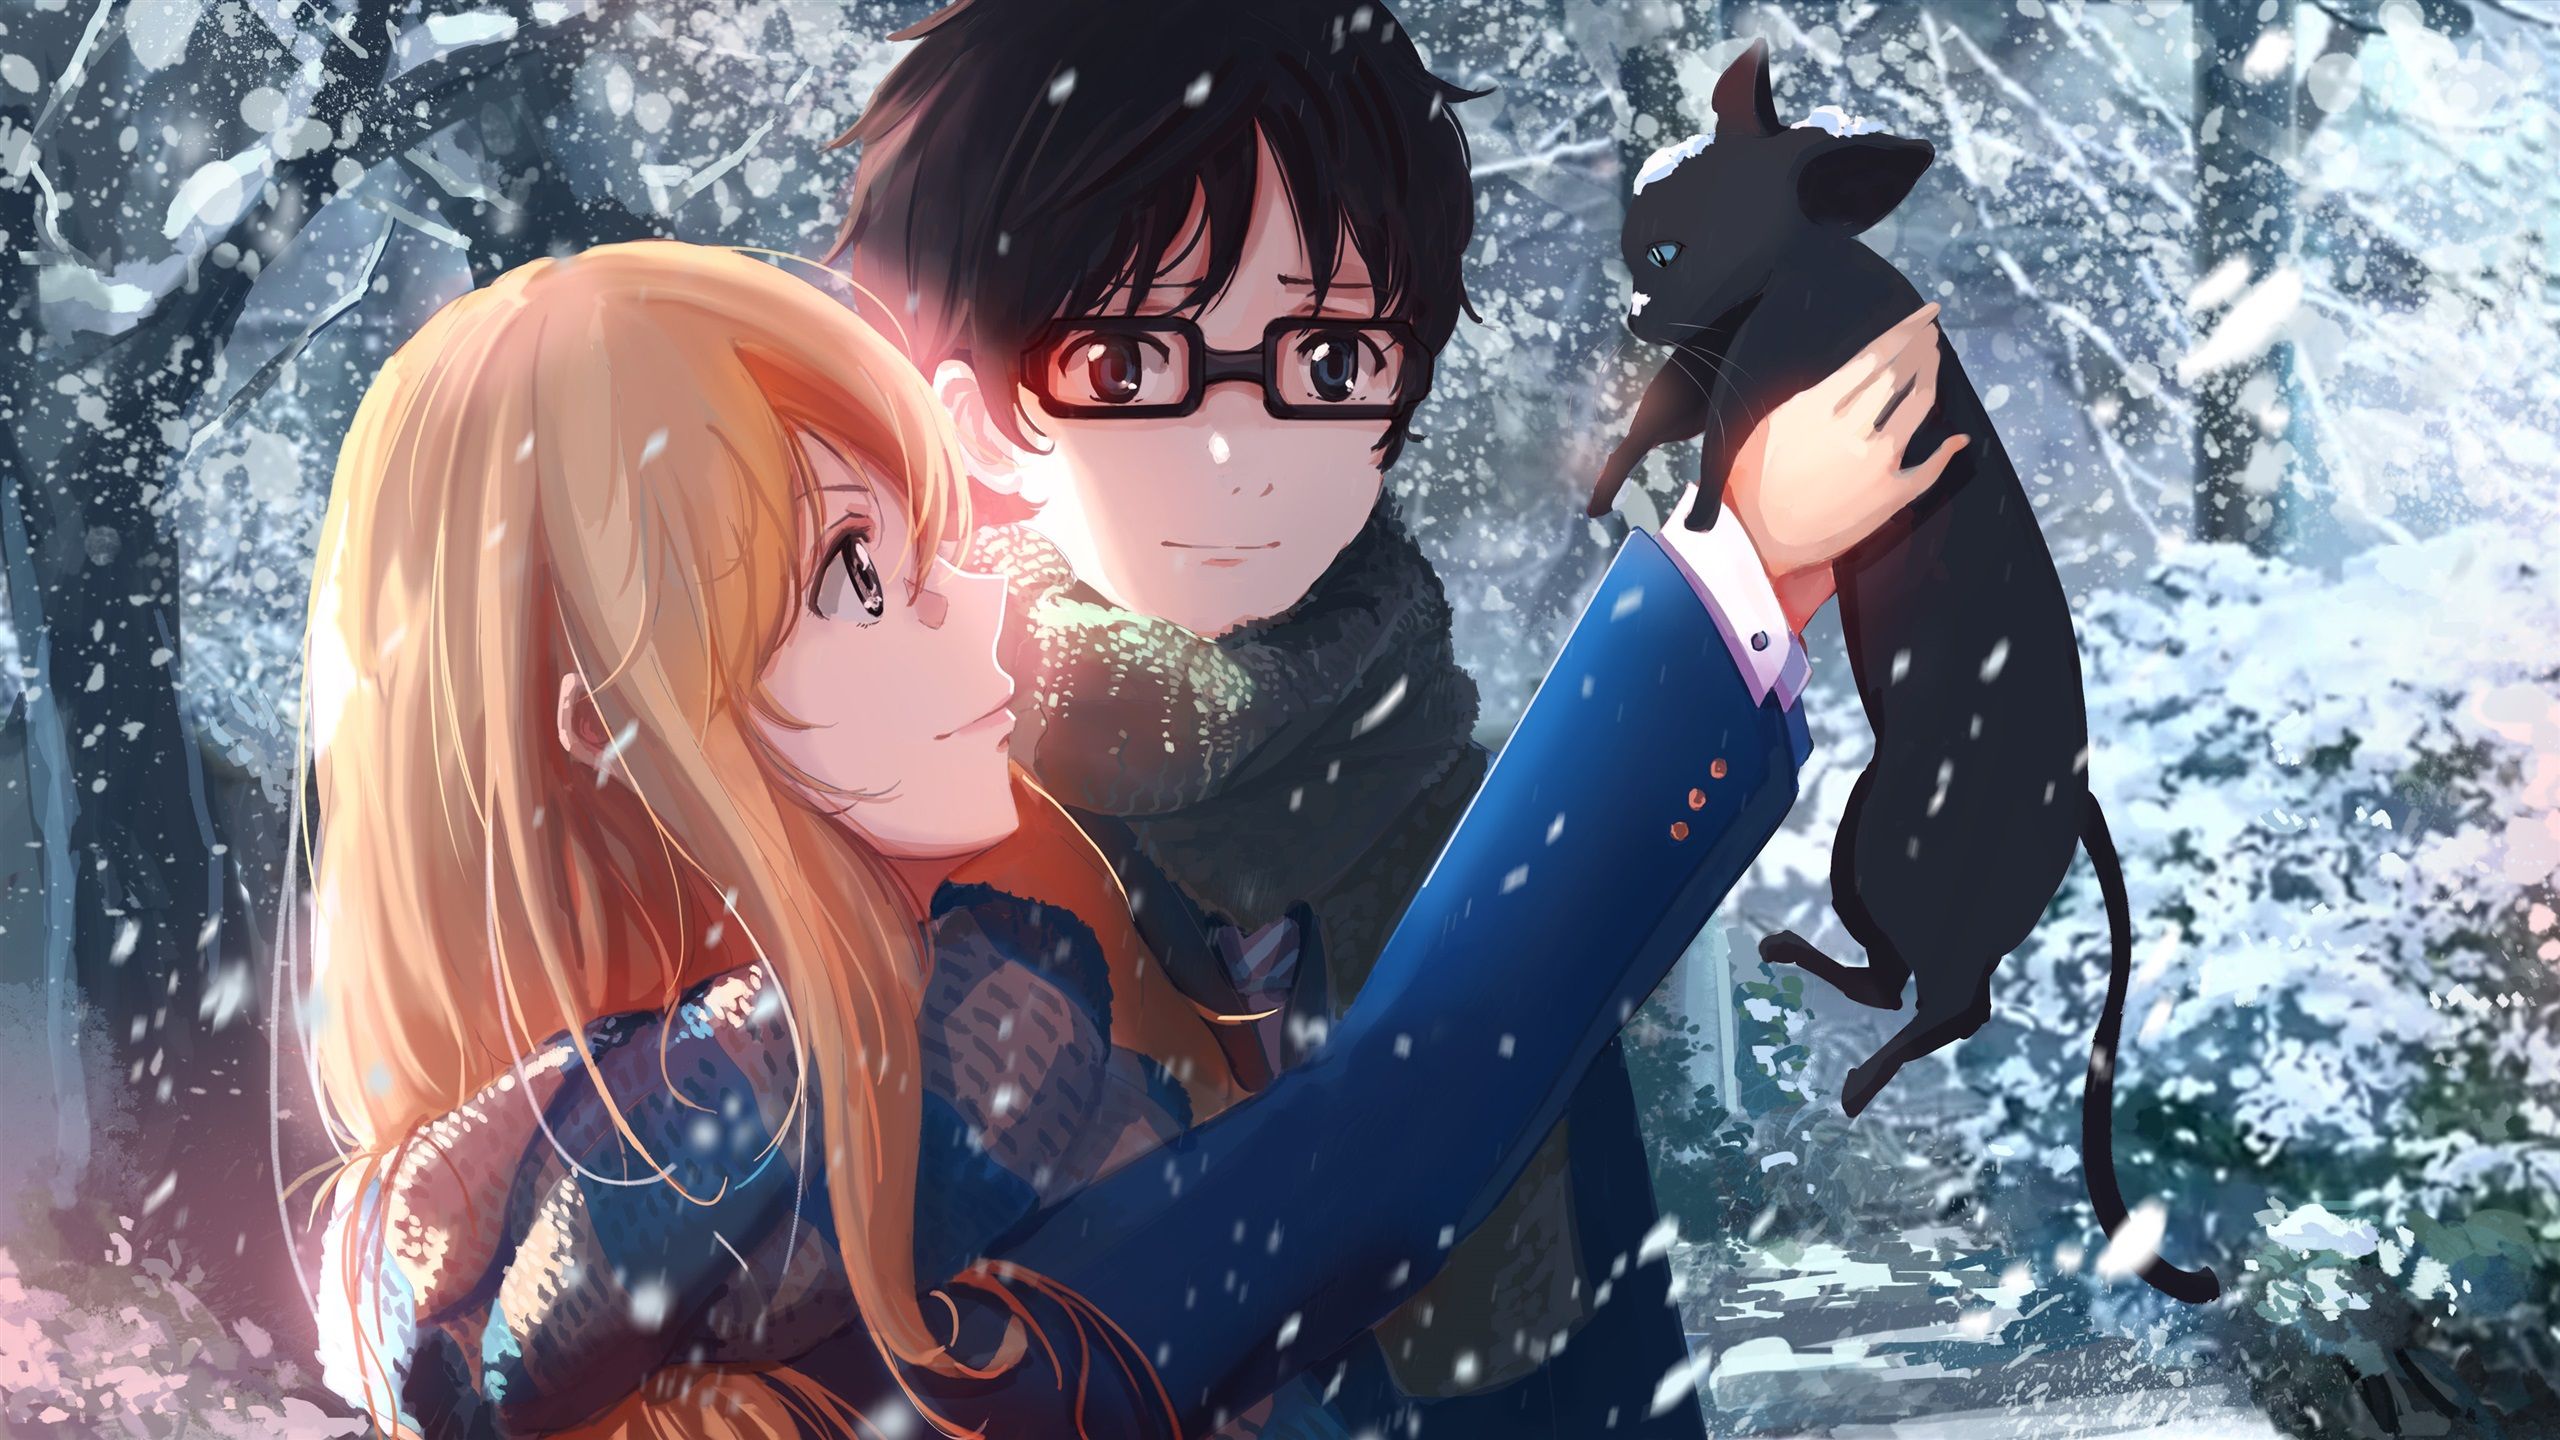 Wallpaper Anime girl and boy in winter, cat, snow 3840x2160 UHD 4K Picture, Image